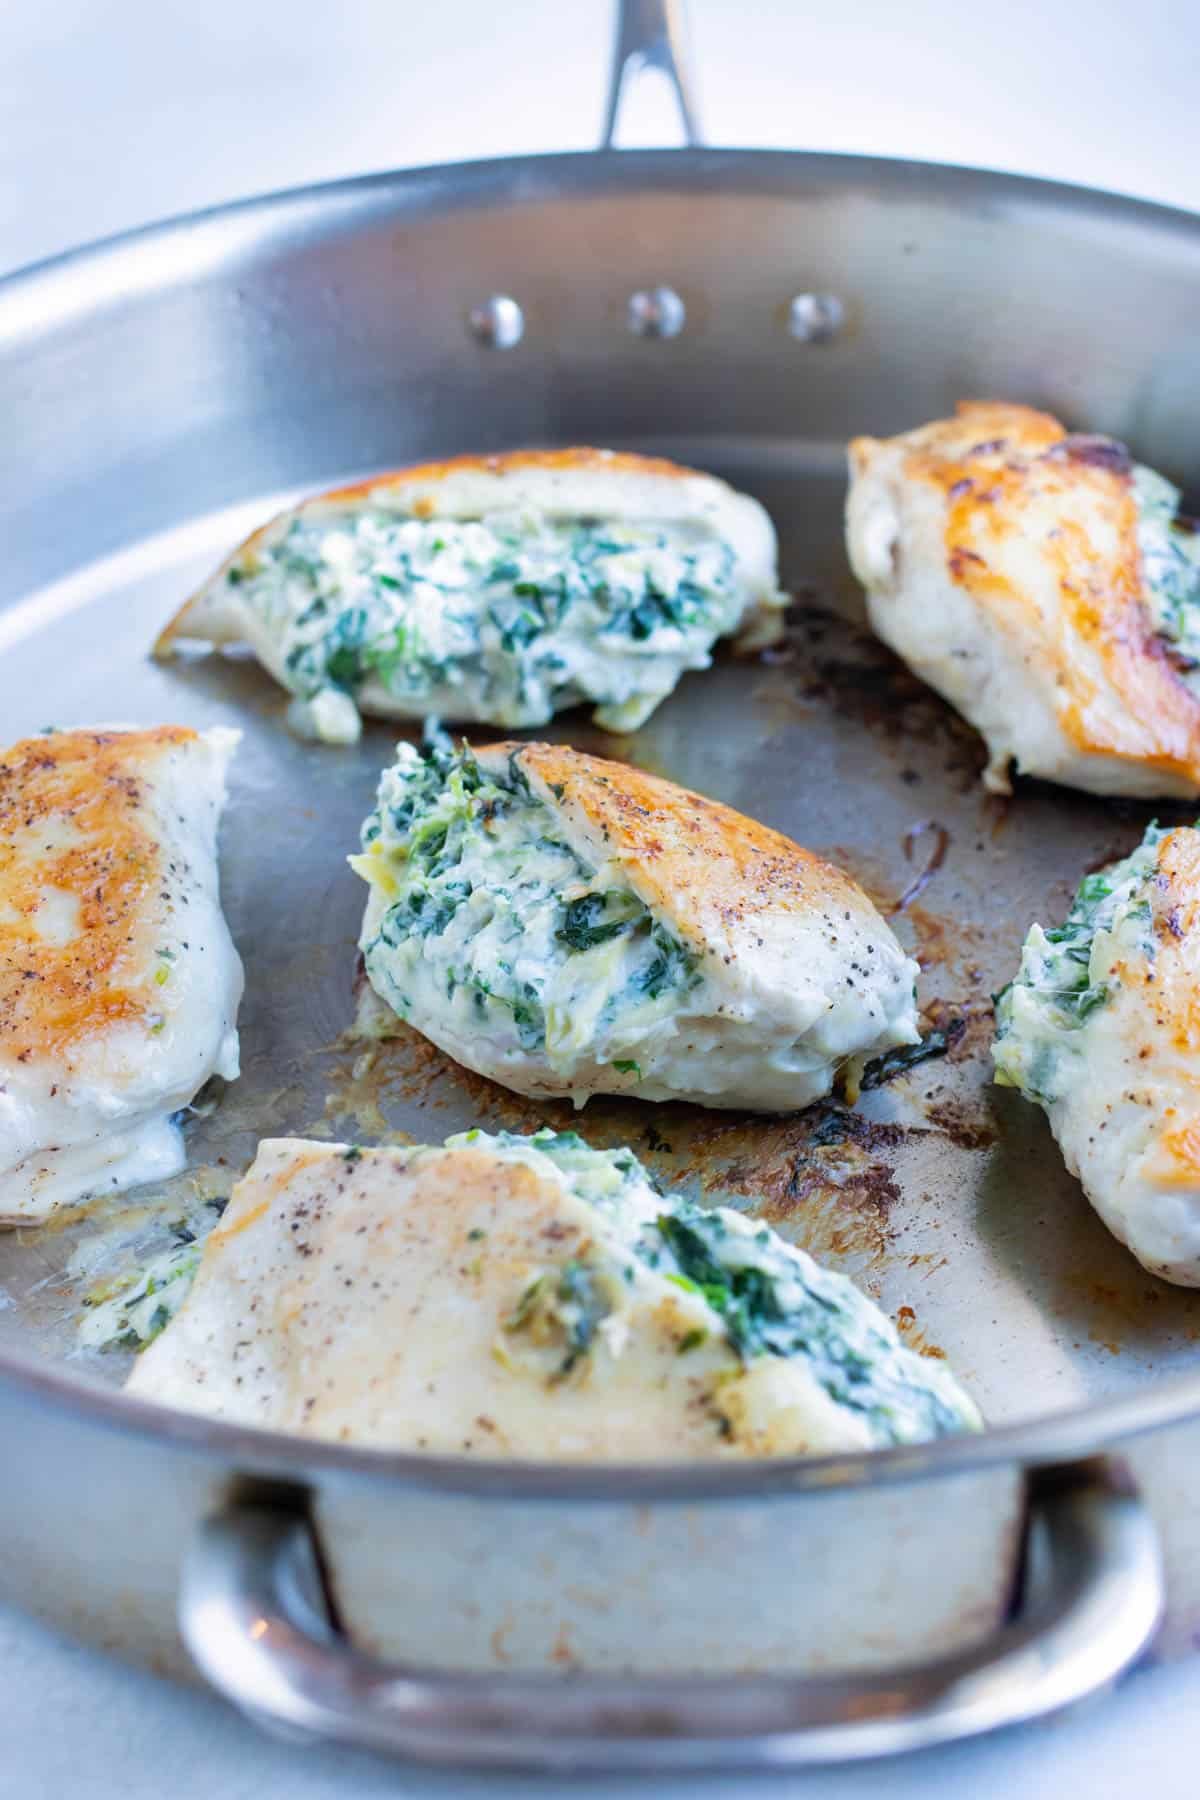 Spinach artichoke stuffed chicken is made in a skillet on the stove.